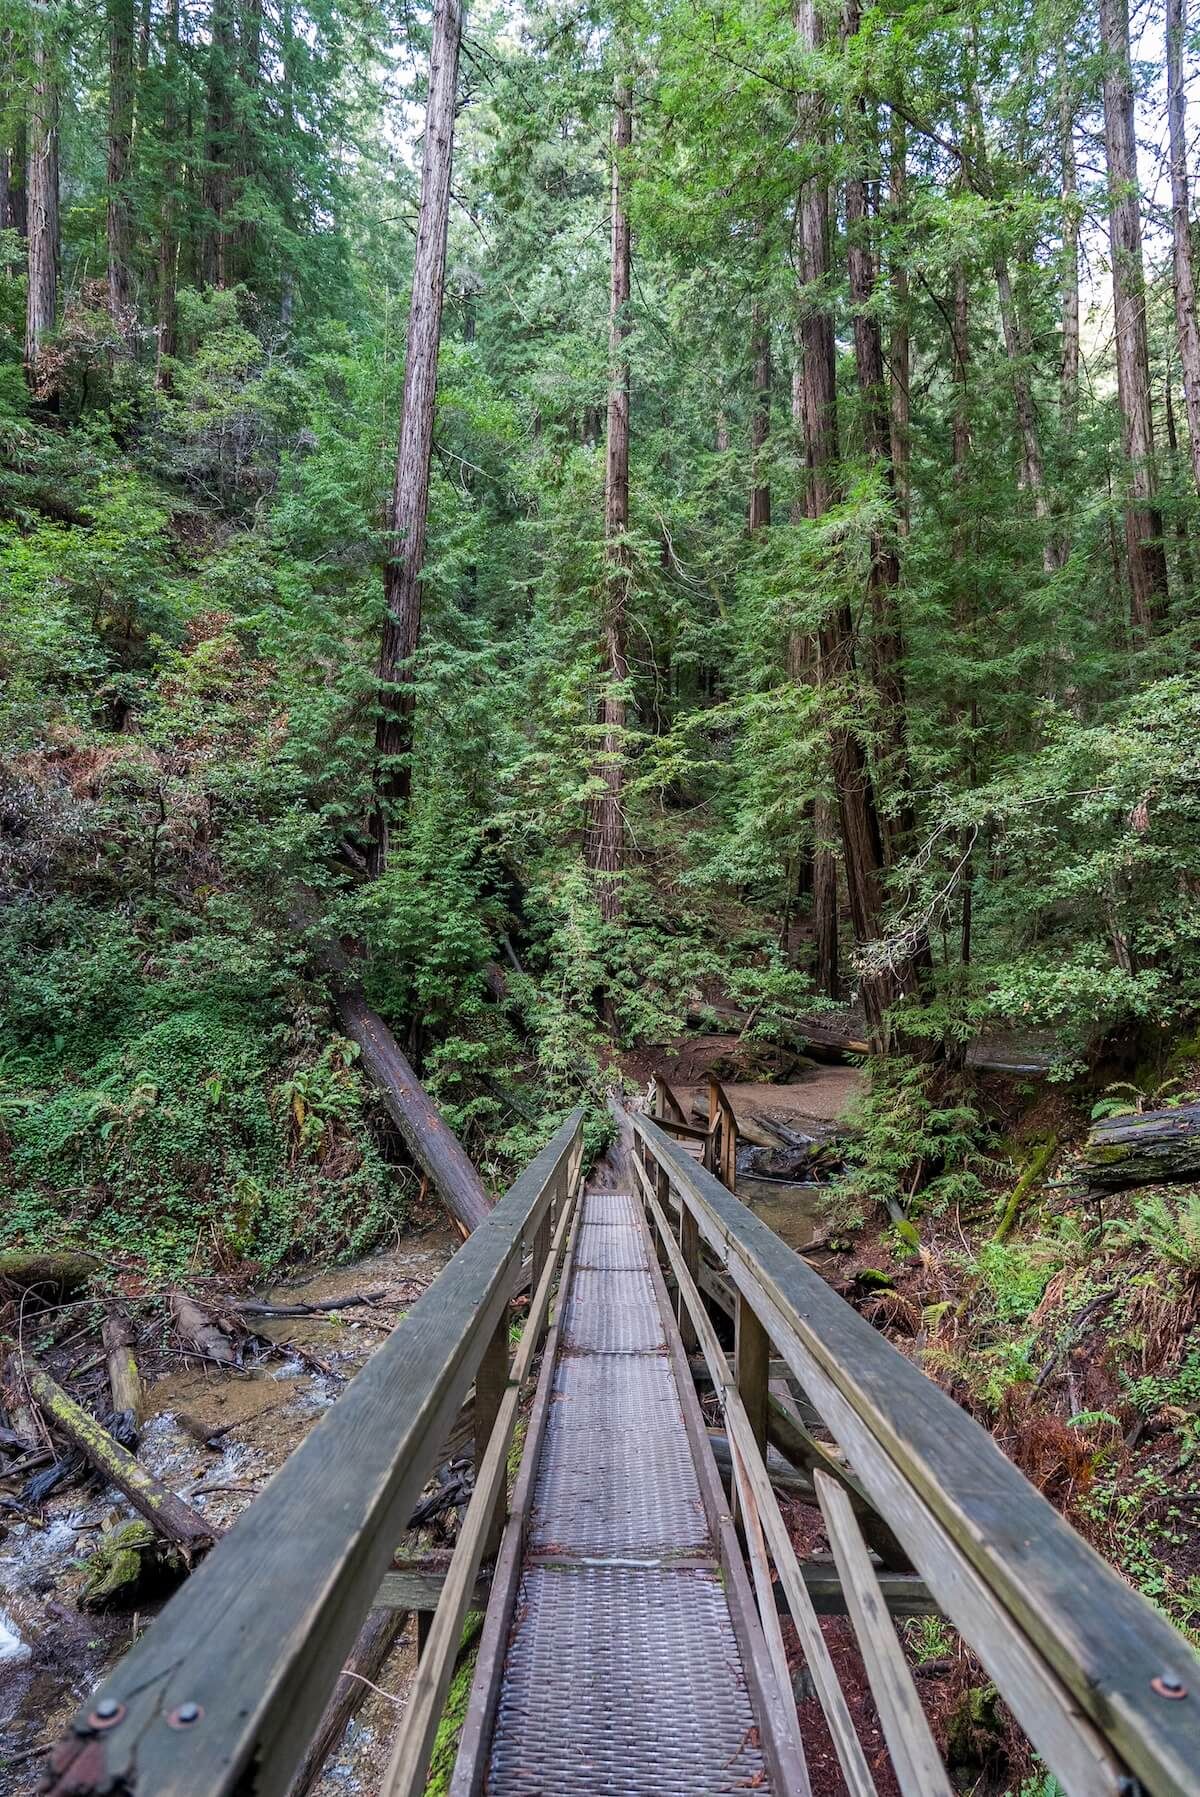 A view looking across a bridge over a ravine on a trail in Muir Woods.